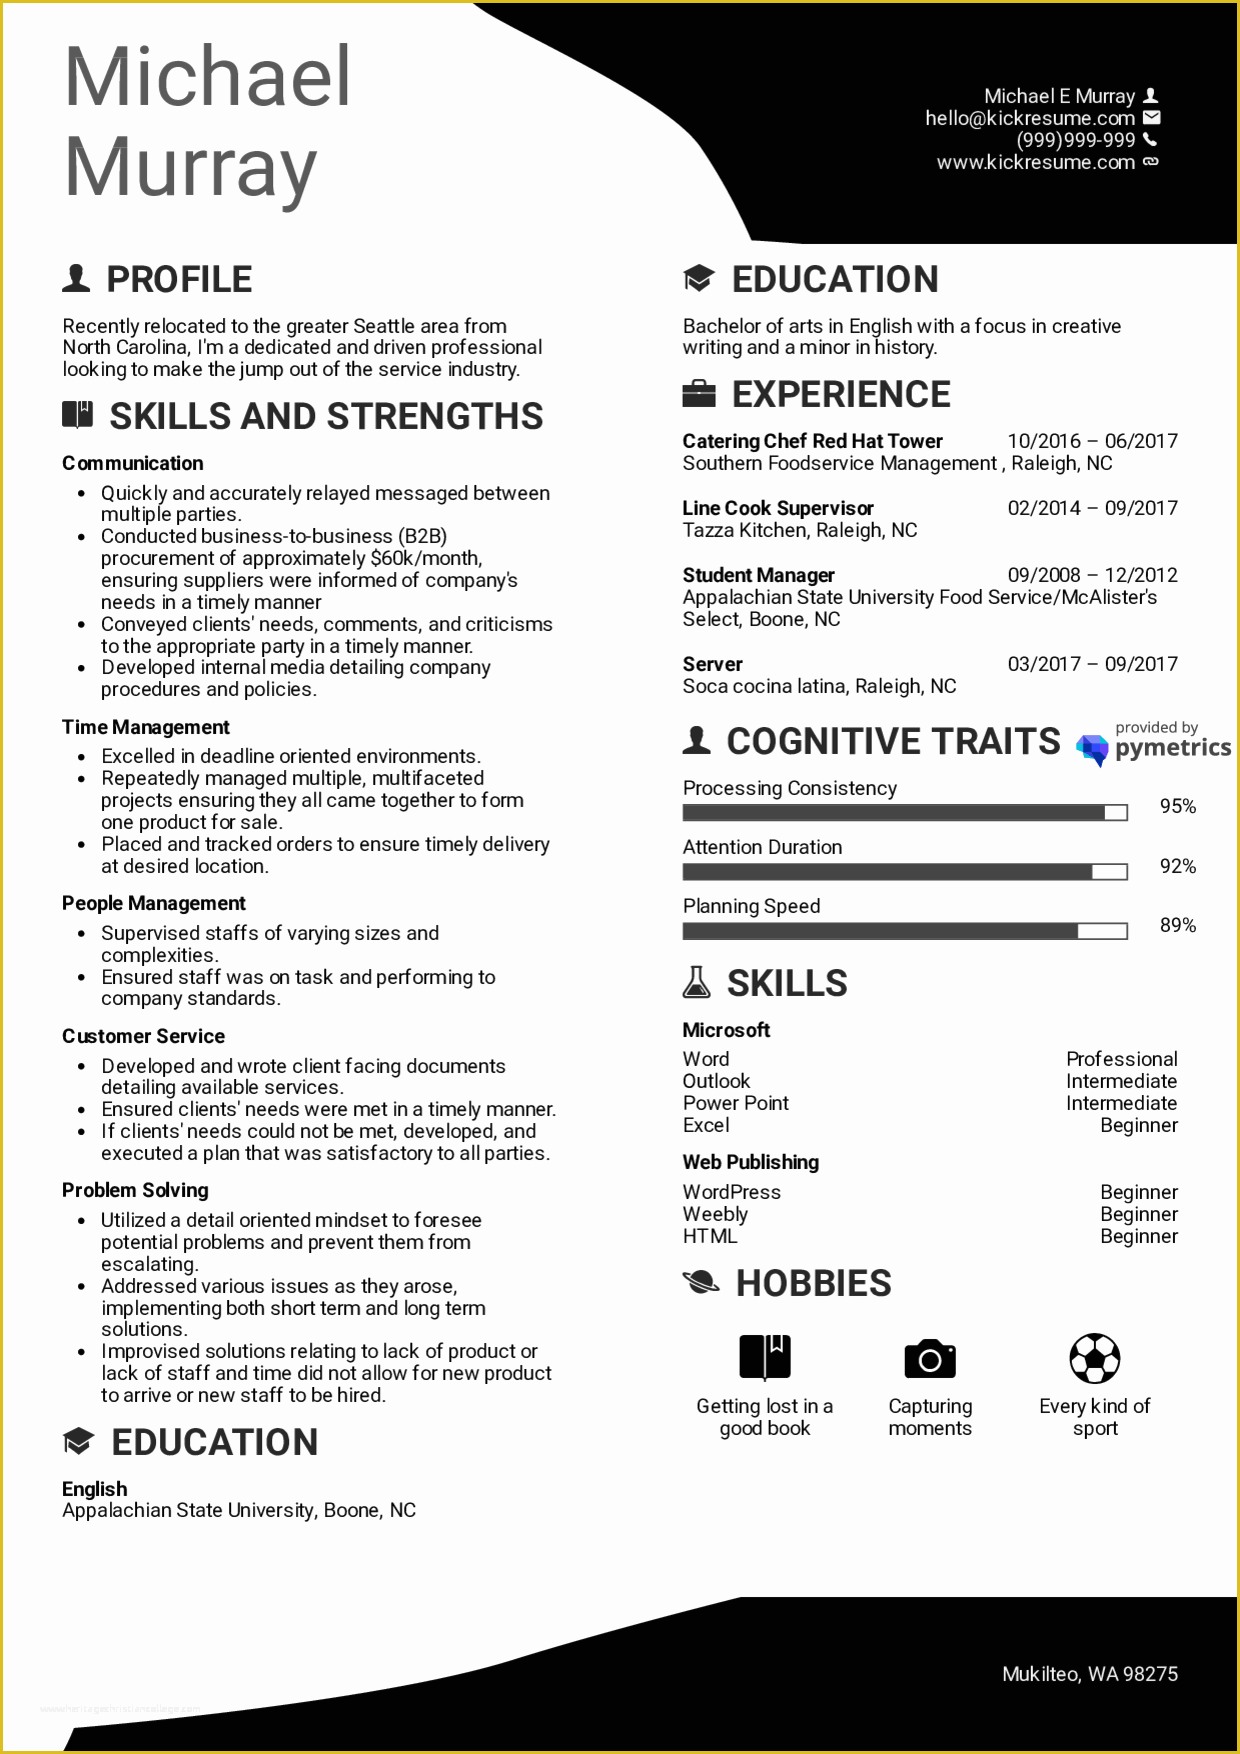 View Free Resume Templates Of Resume Examples by Real People Line Cook Supervisor Cv